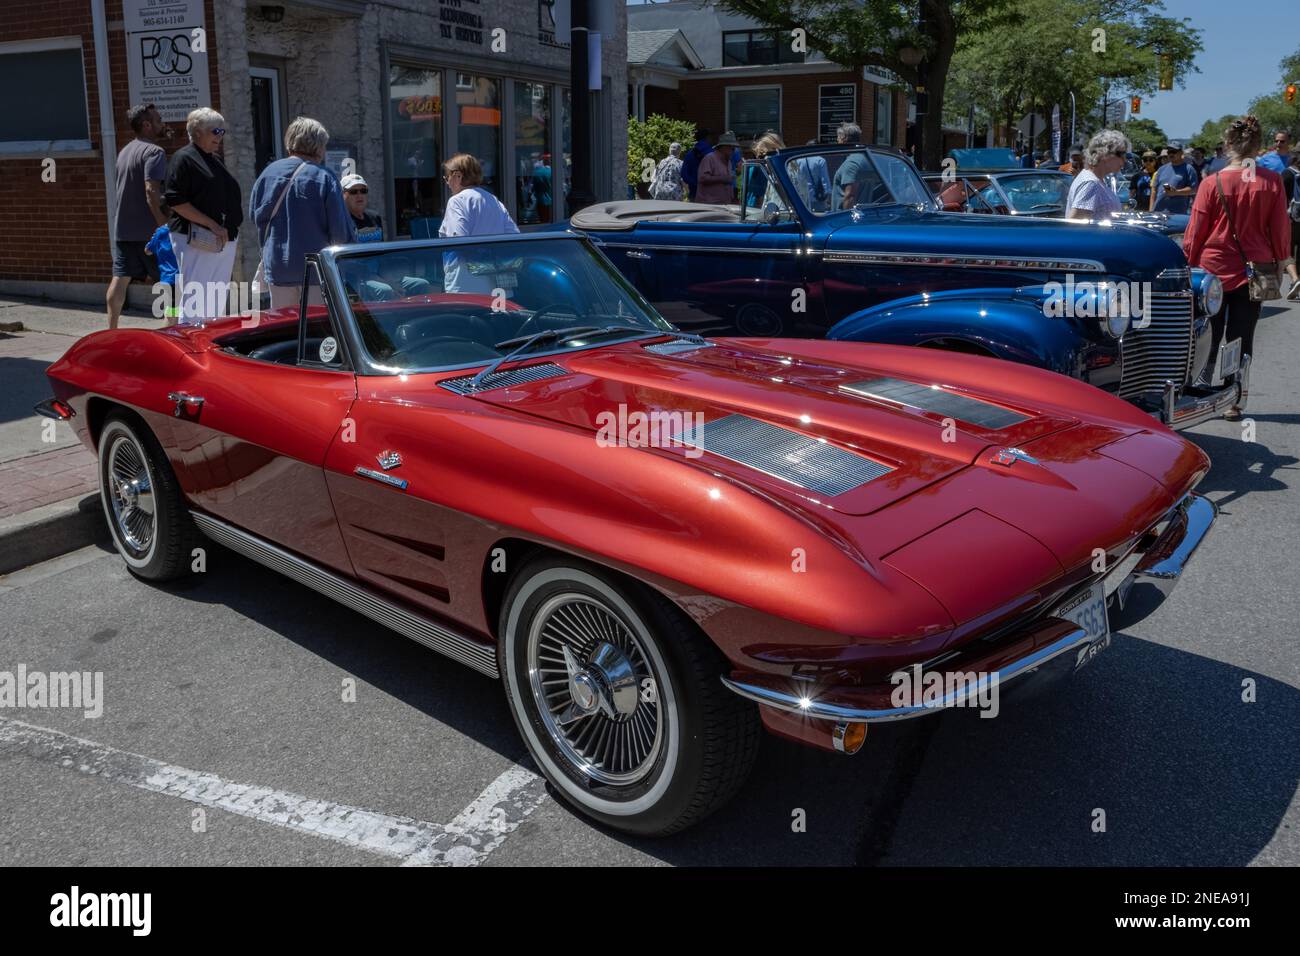 Burlington,ON,Canada July 9, 2022: Red Chevrolet Corvette (C2) in Burlington Car Show. First Car Show after the COVID19 outbrake. Stock Photo